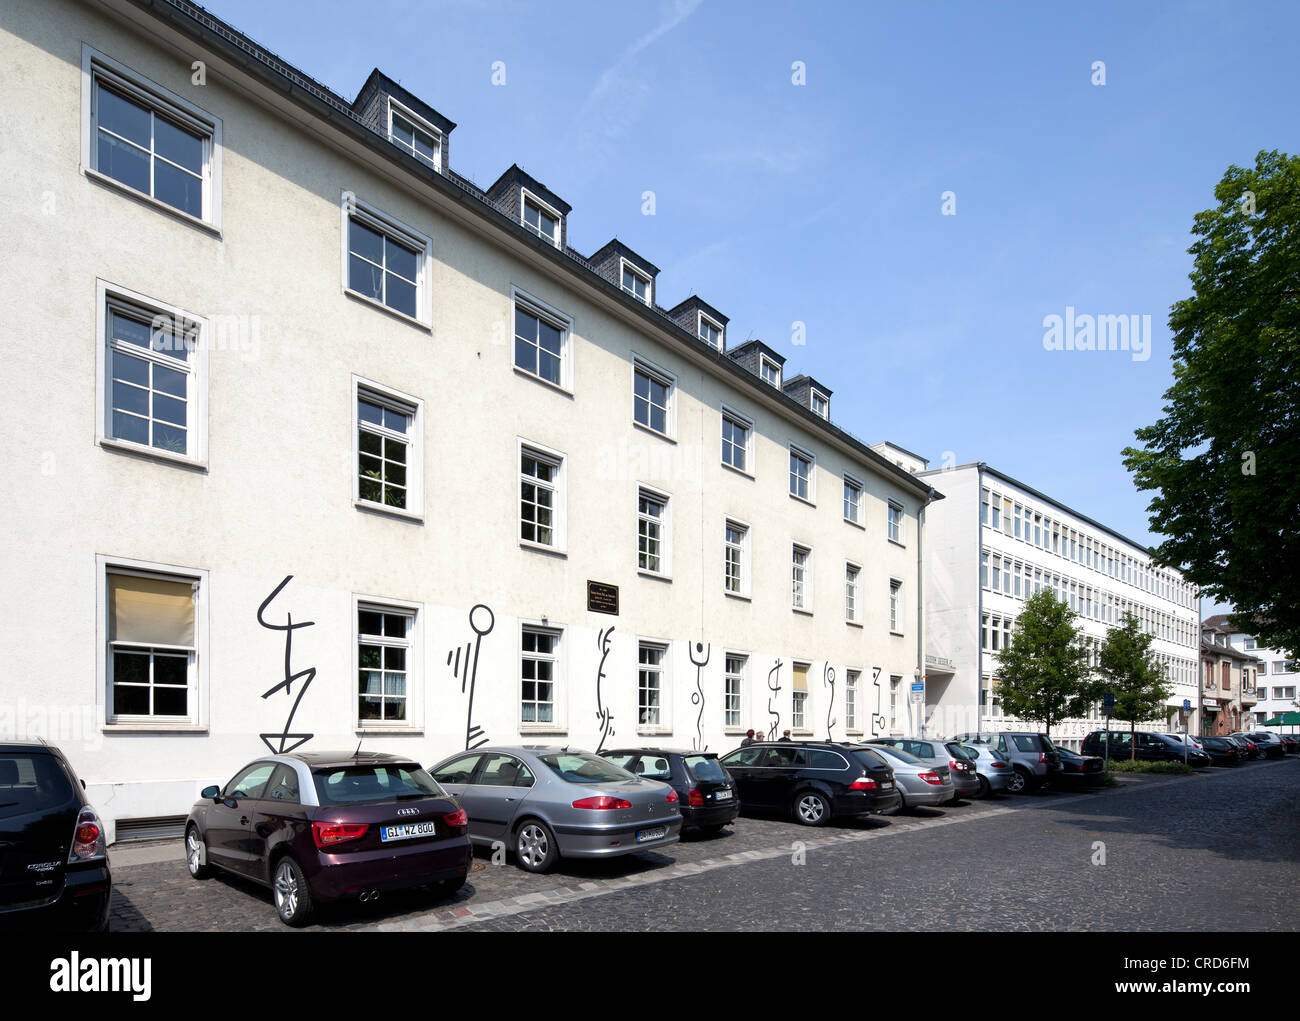 Central regional council of Hesse, Giessen, Hesse, Germany, Europe, PublicGround Stock Photo